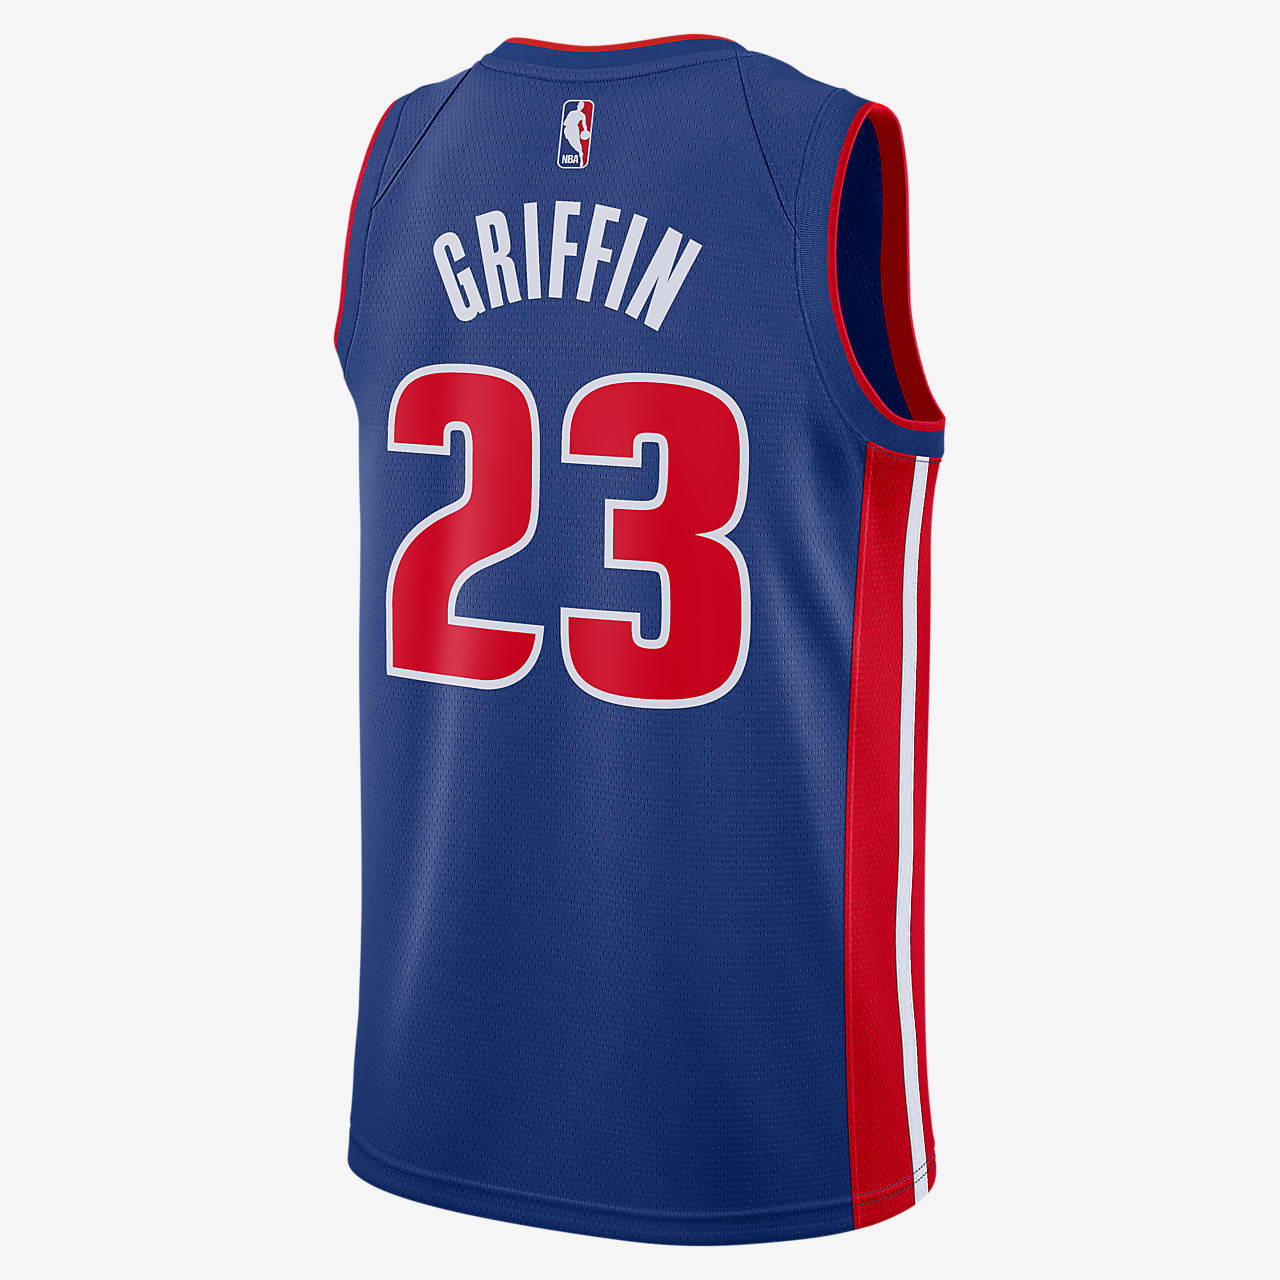 griffin jersey